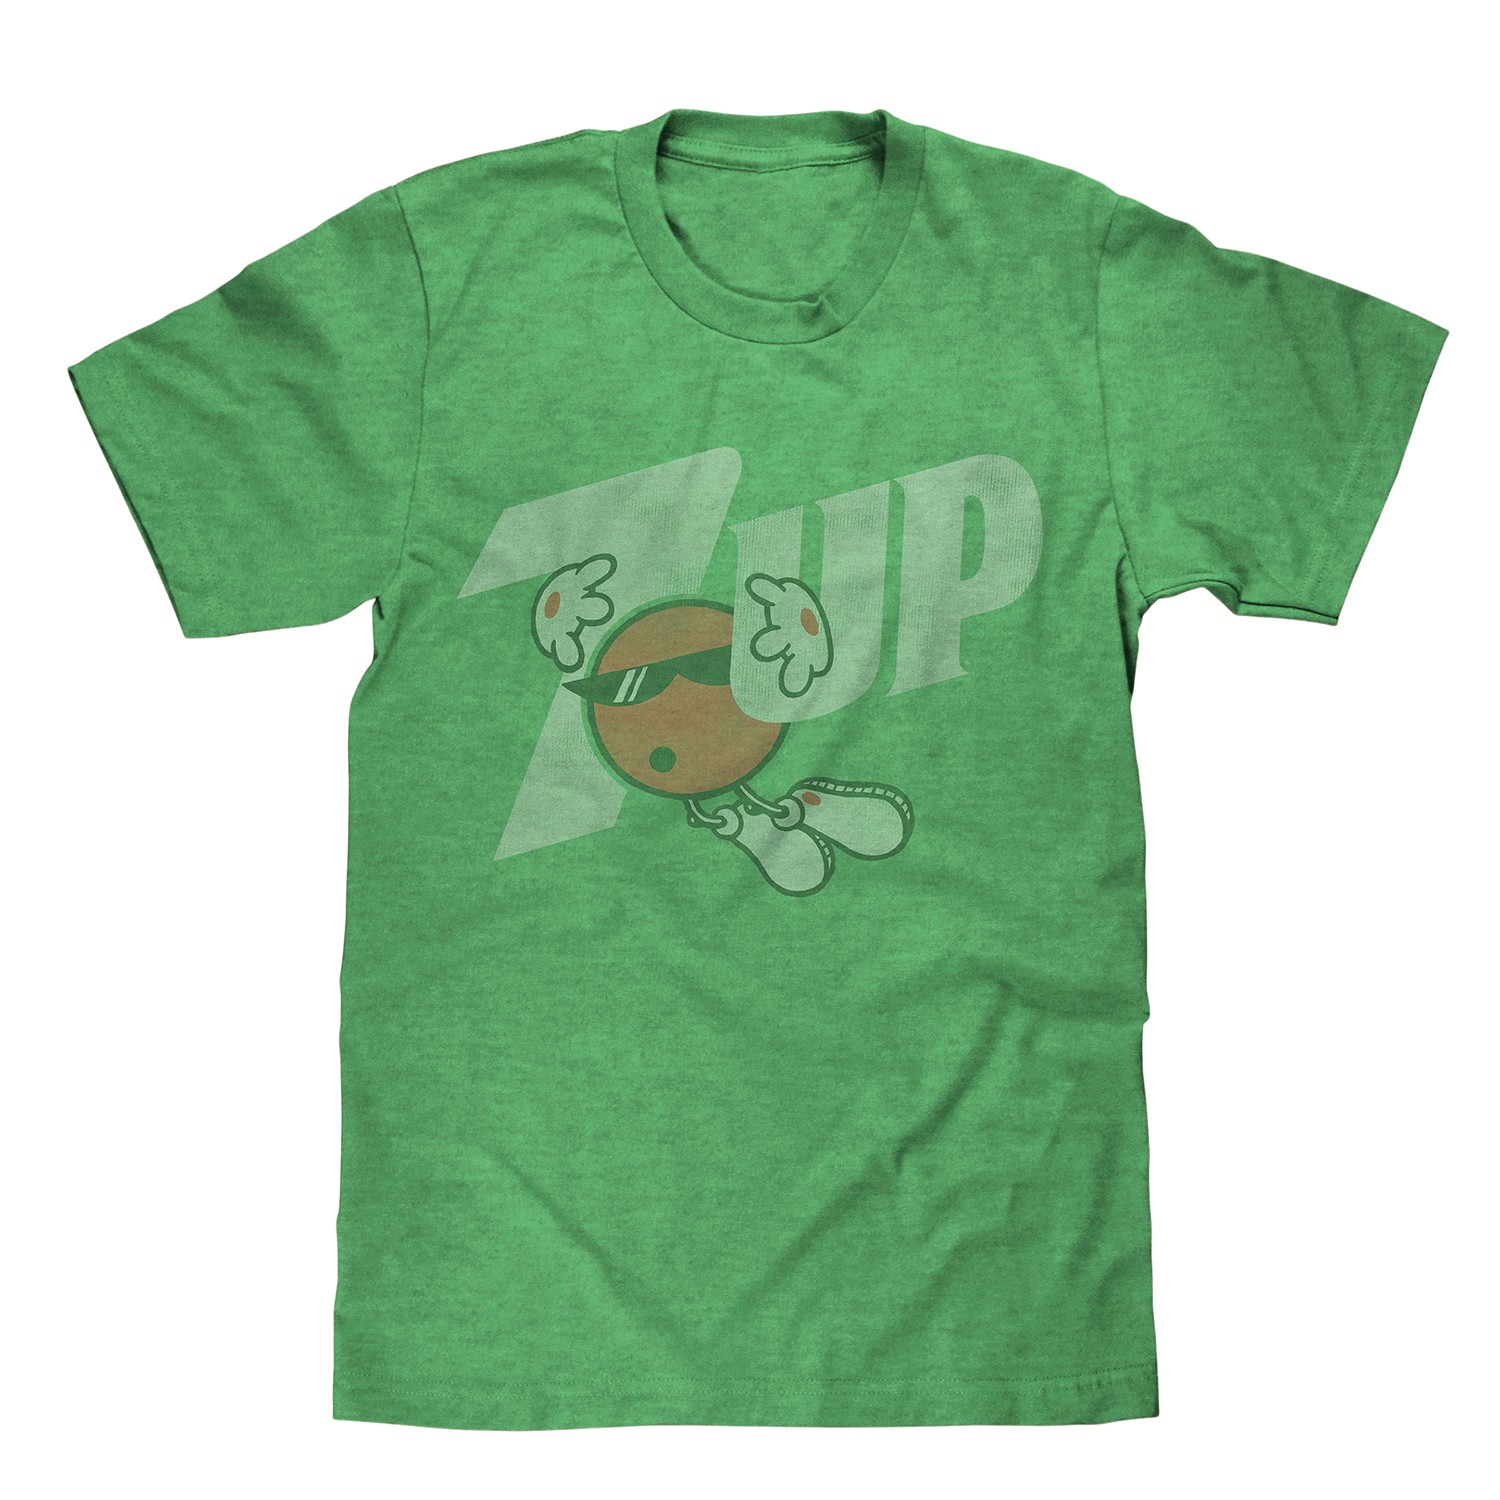 7-Up Shirt | What on Earth